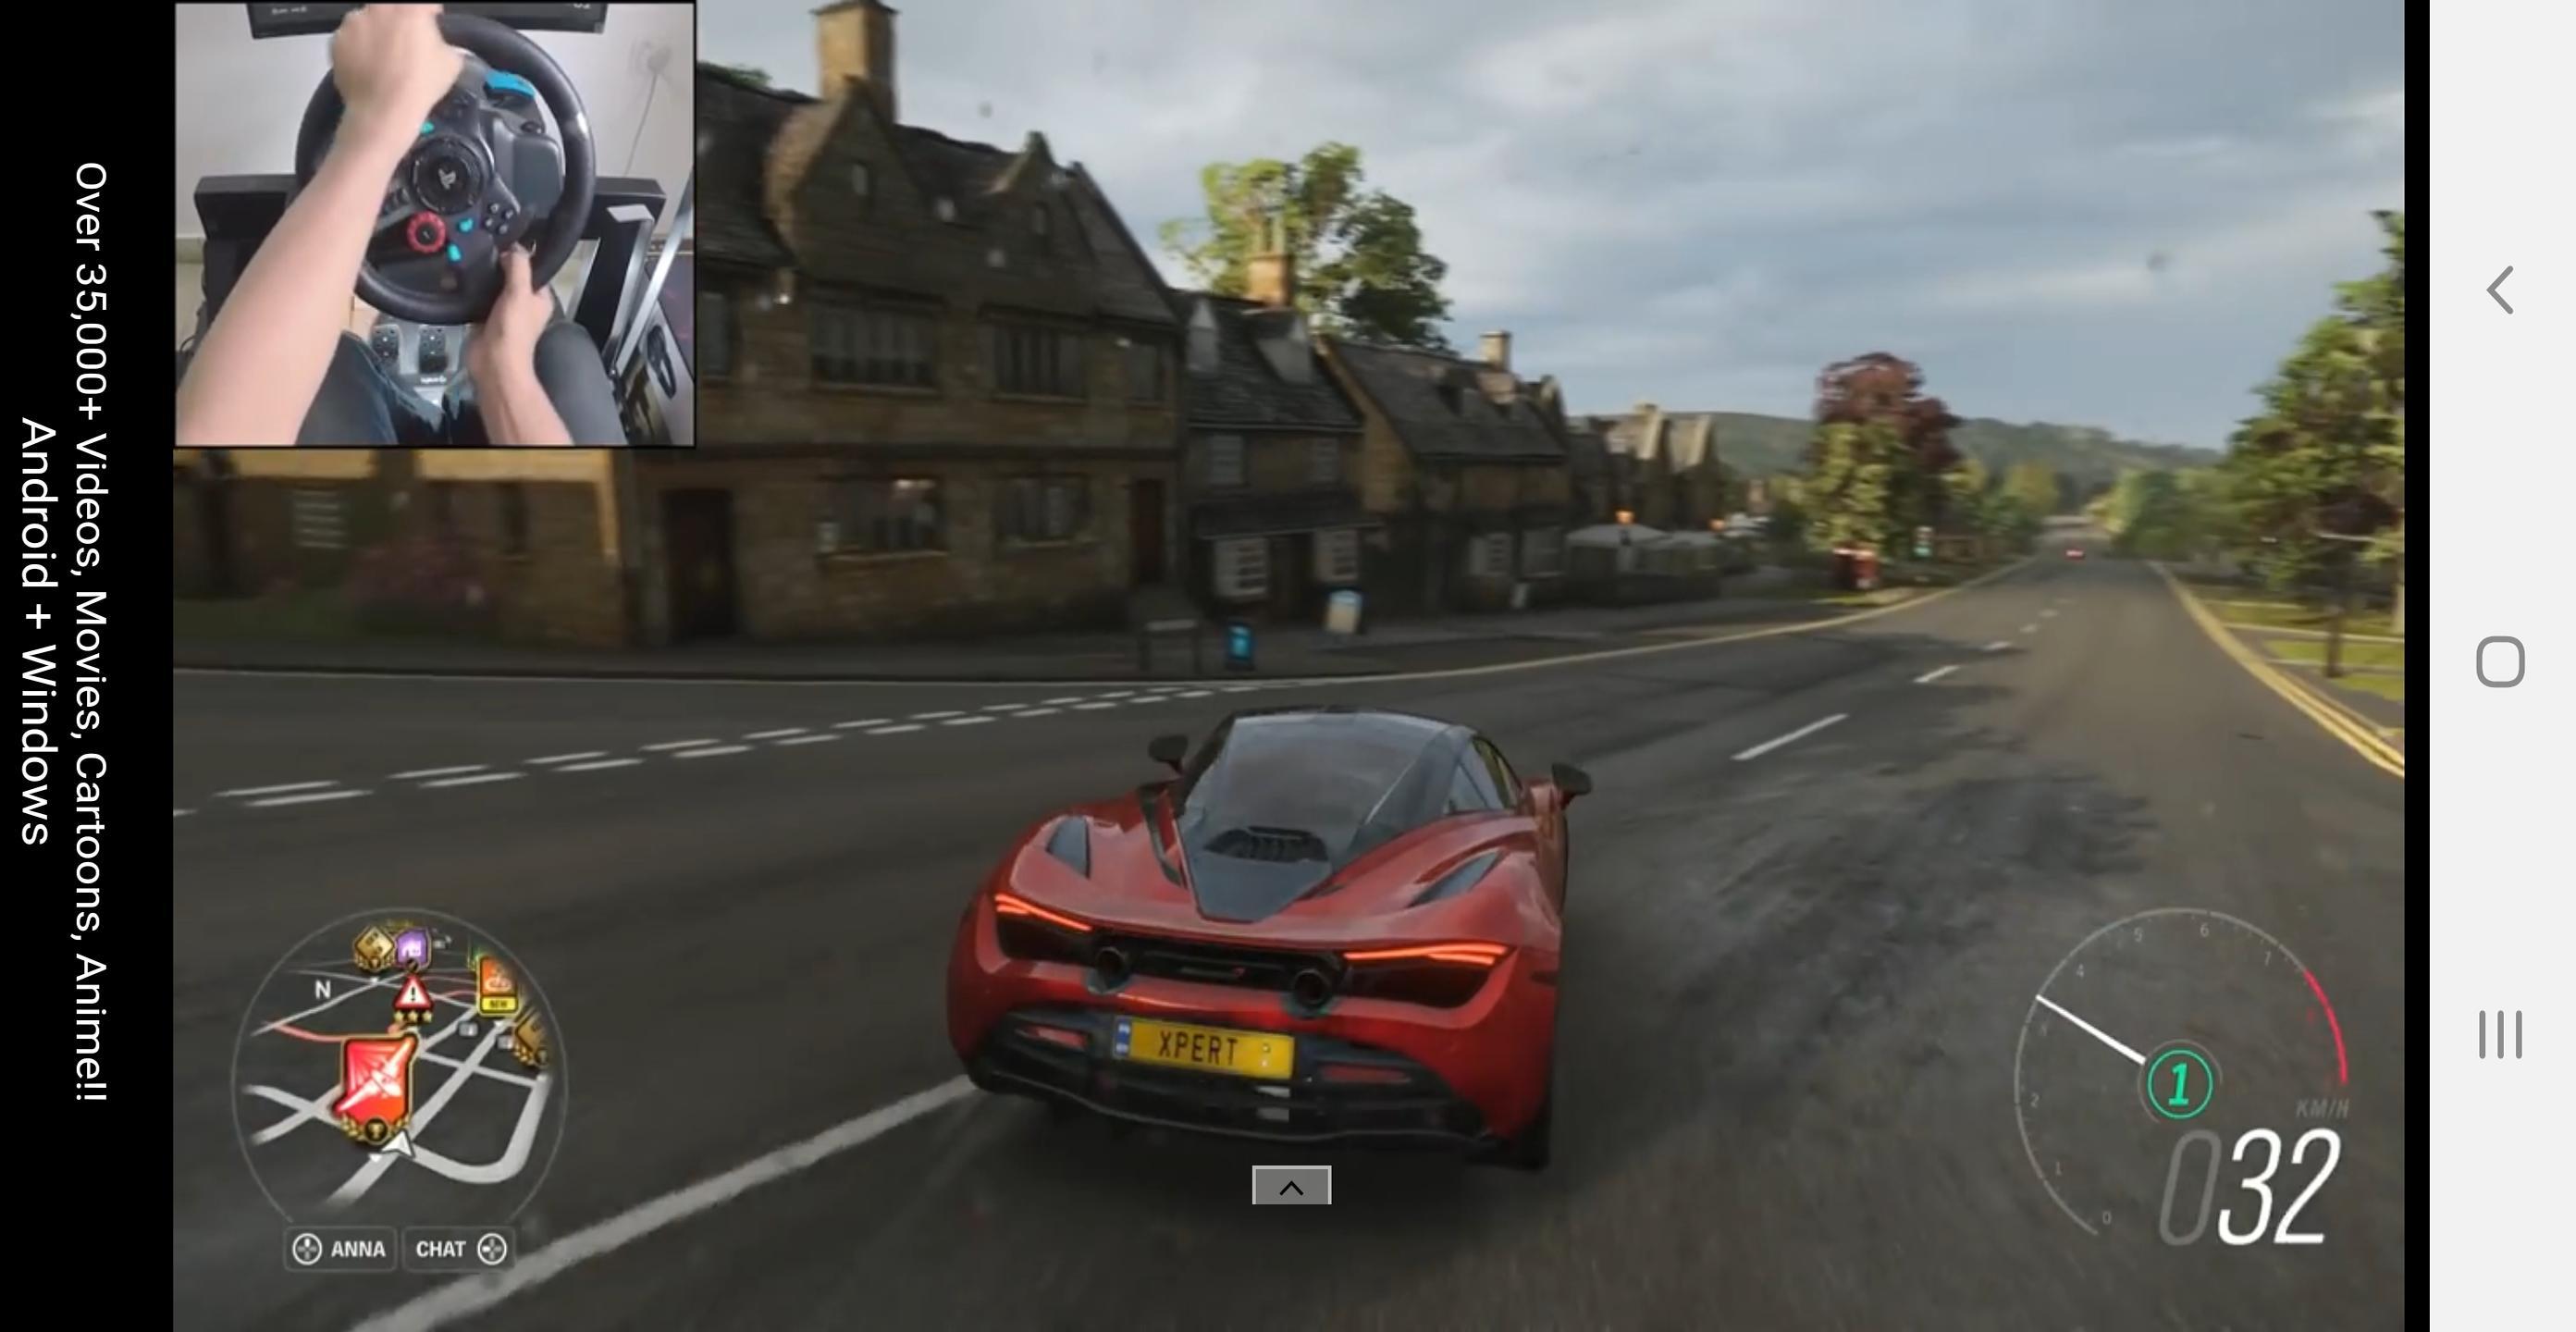 Forza Horizon 4 - Game Videos Guide For Android - APK Download